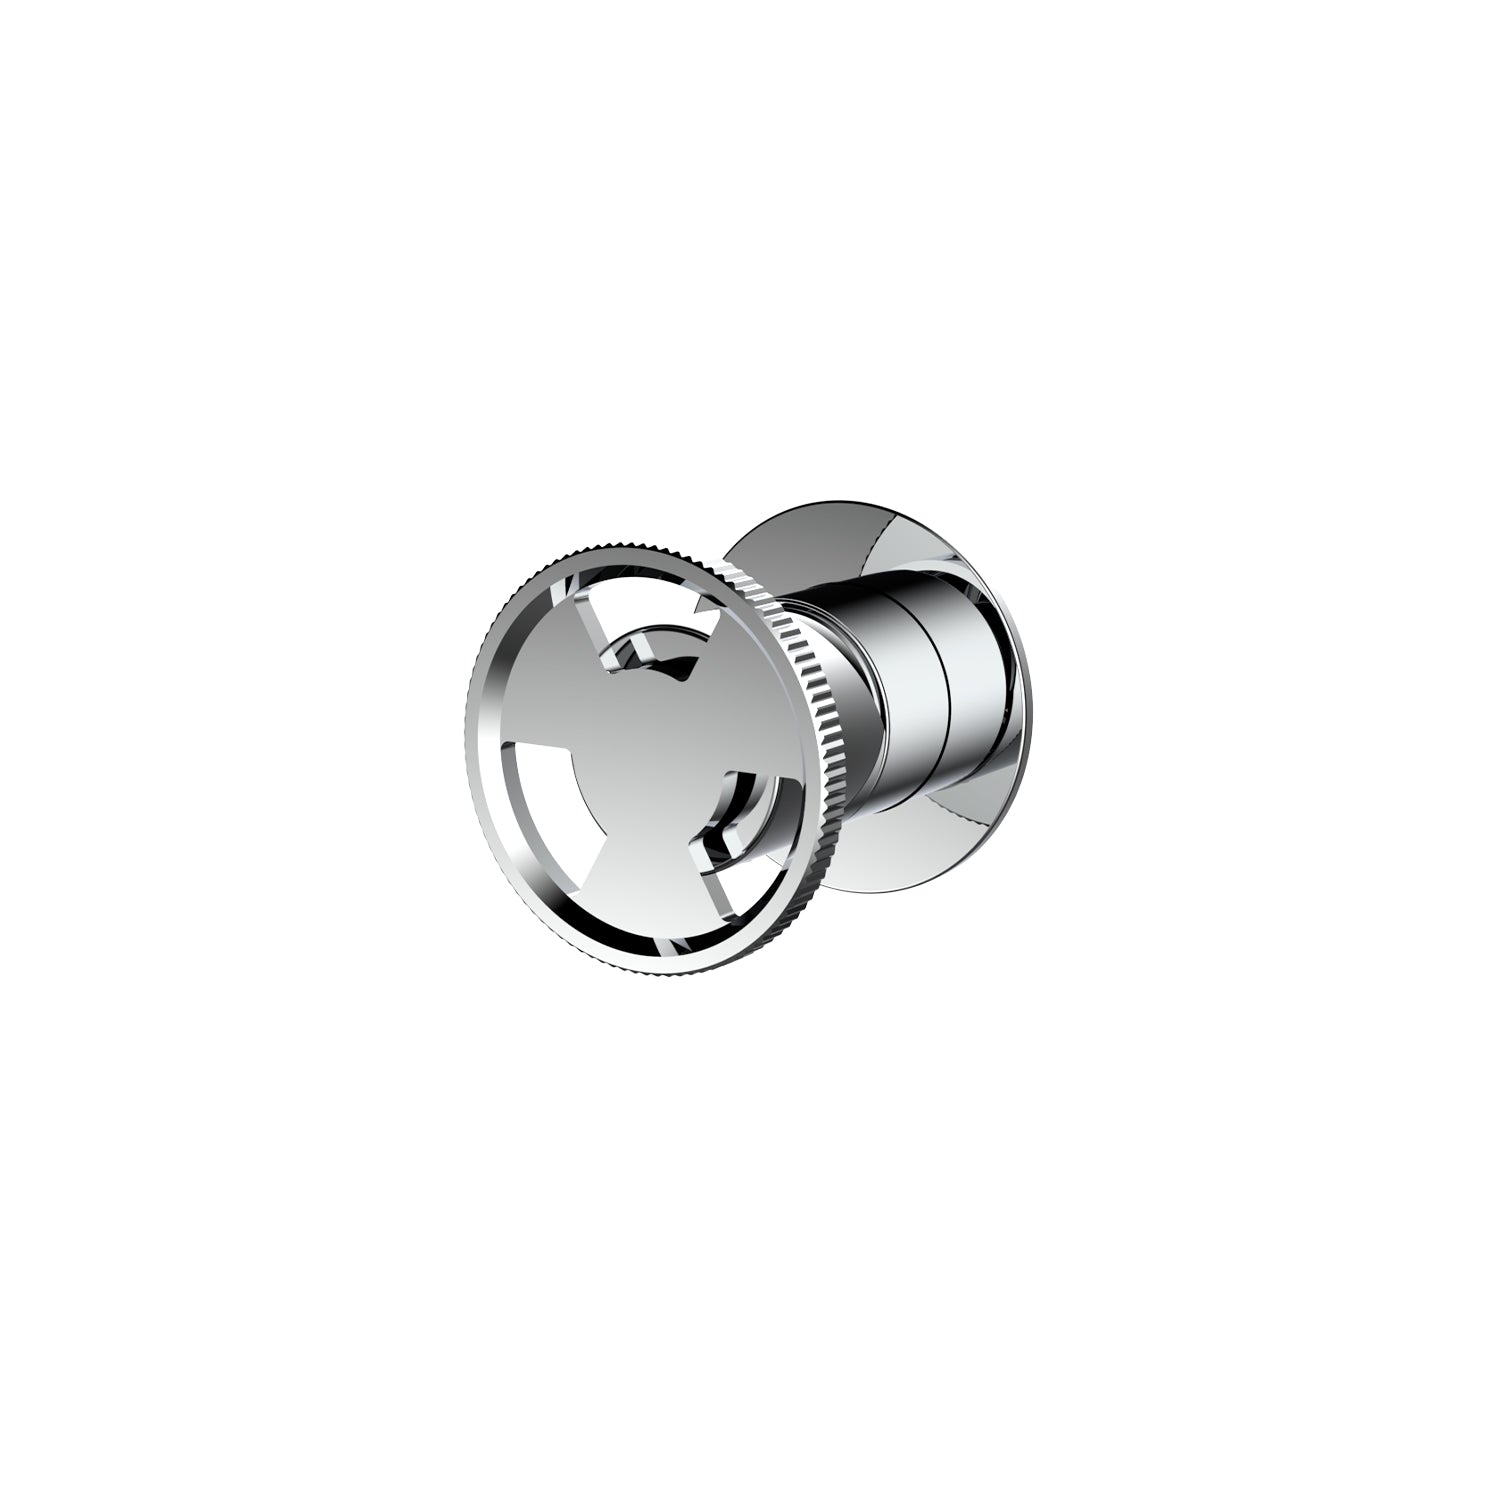 DAX Round Shower Valve with 1 Functions Chrome Finish (DAX-8030046-CR)